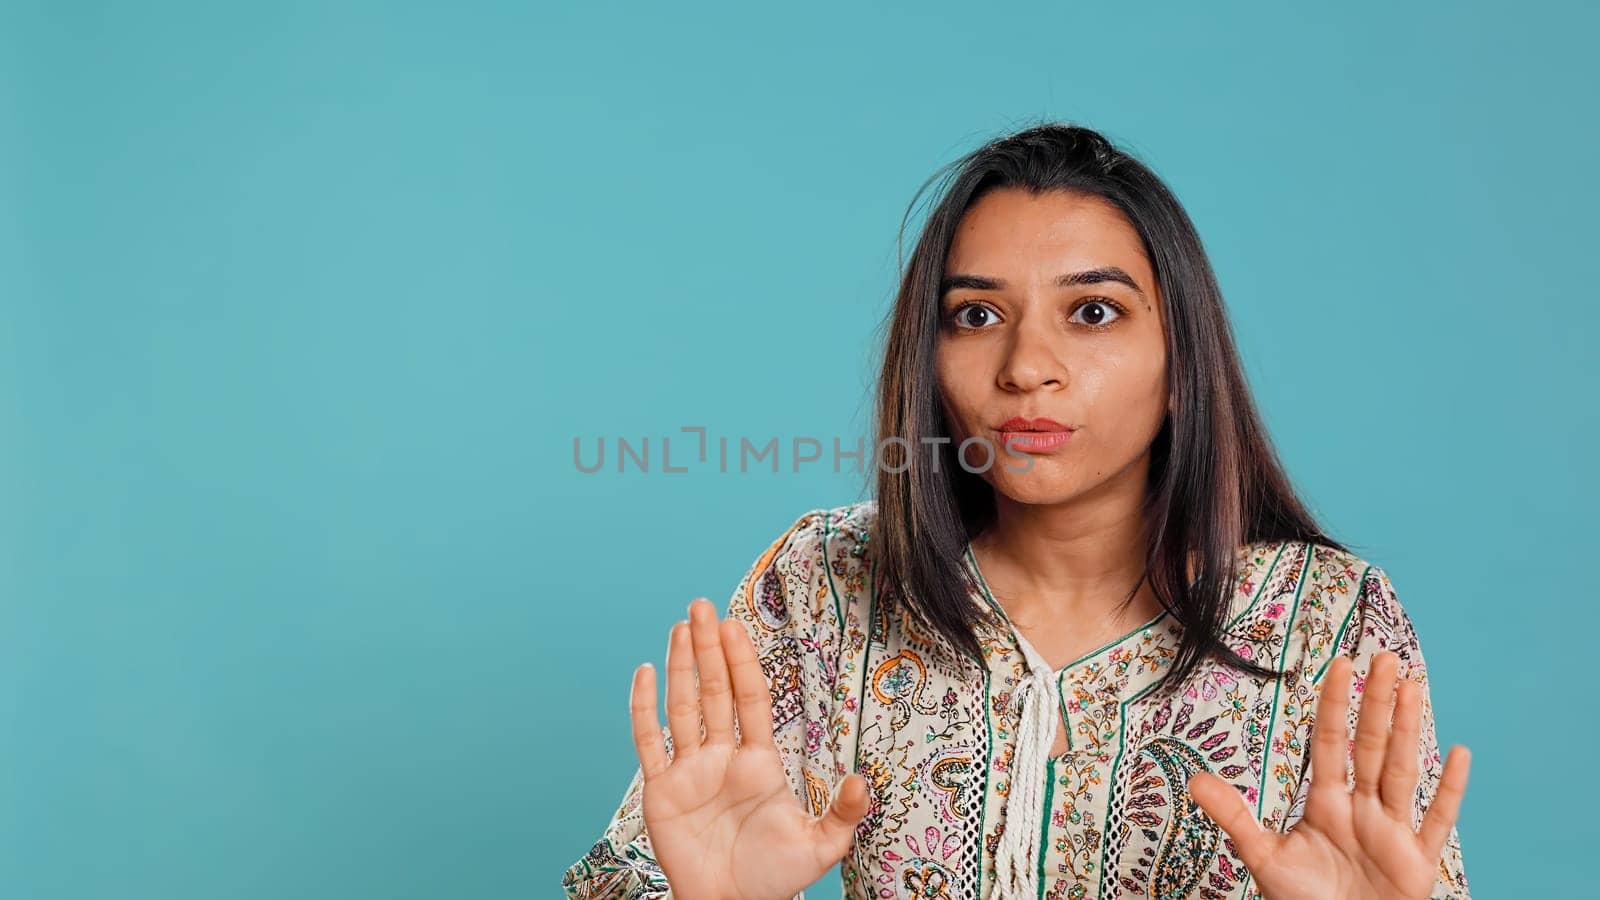 Stern indian woman doing stop hand gesture sign, complaining. Authoritative person doing firm halt sign gesturing, wishing to end concept, isolated over studio background, camera B